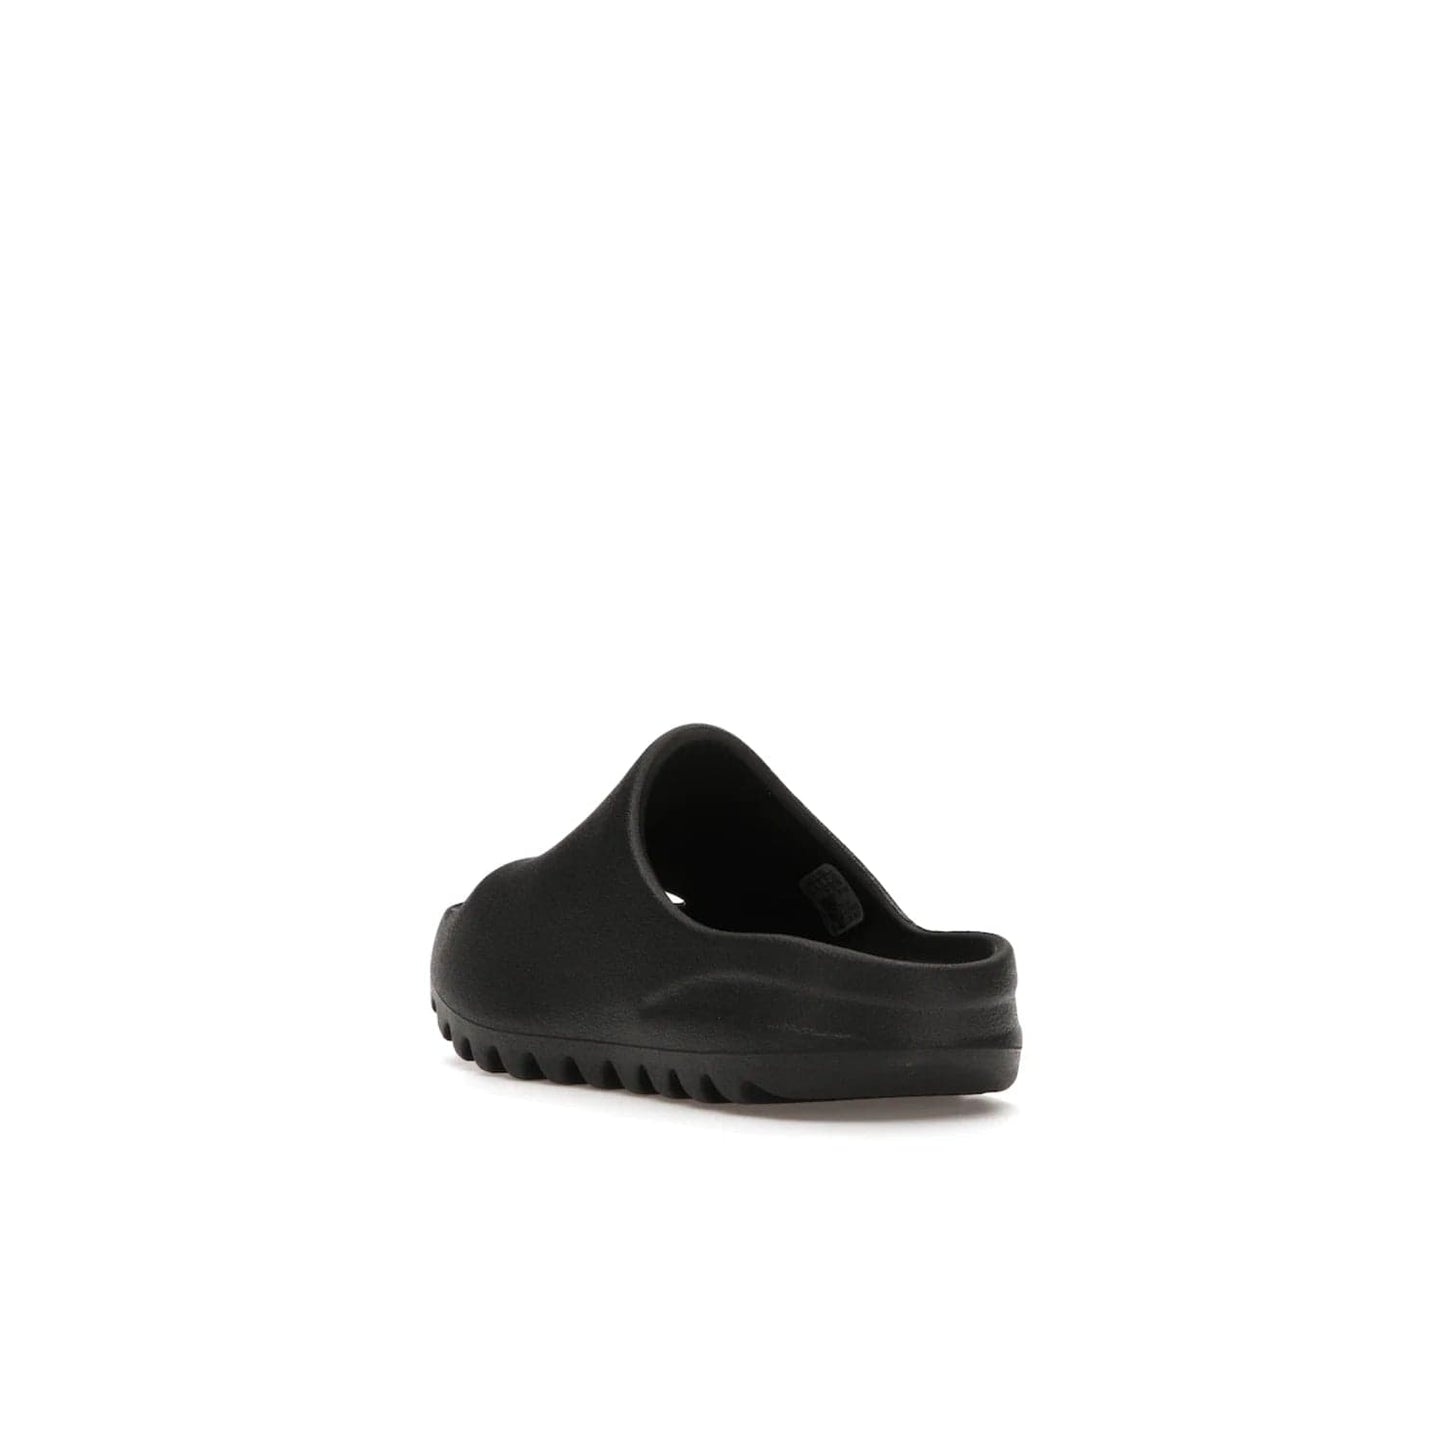 adidas Yeezy Slide Onyx (Kids) - Image 25 - Only at www.BallersClubKickz.com - adidas Yeezy Slide Onyx (Kids): Comfortable foam construction with textured surface and iconic three-stripe logo. Breathable, open-toe design and deep grooves for traction. Released in March 2021 at $50.